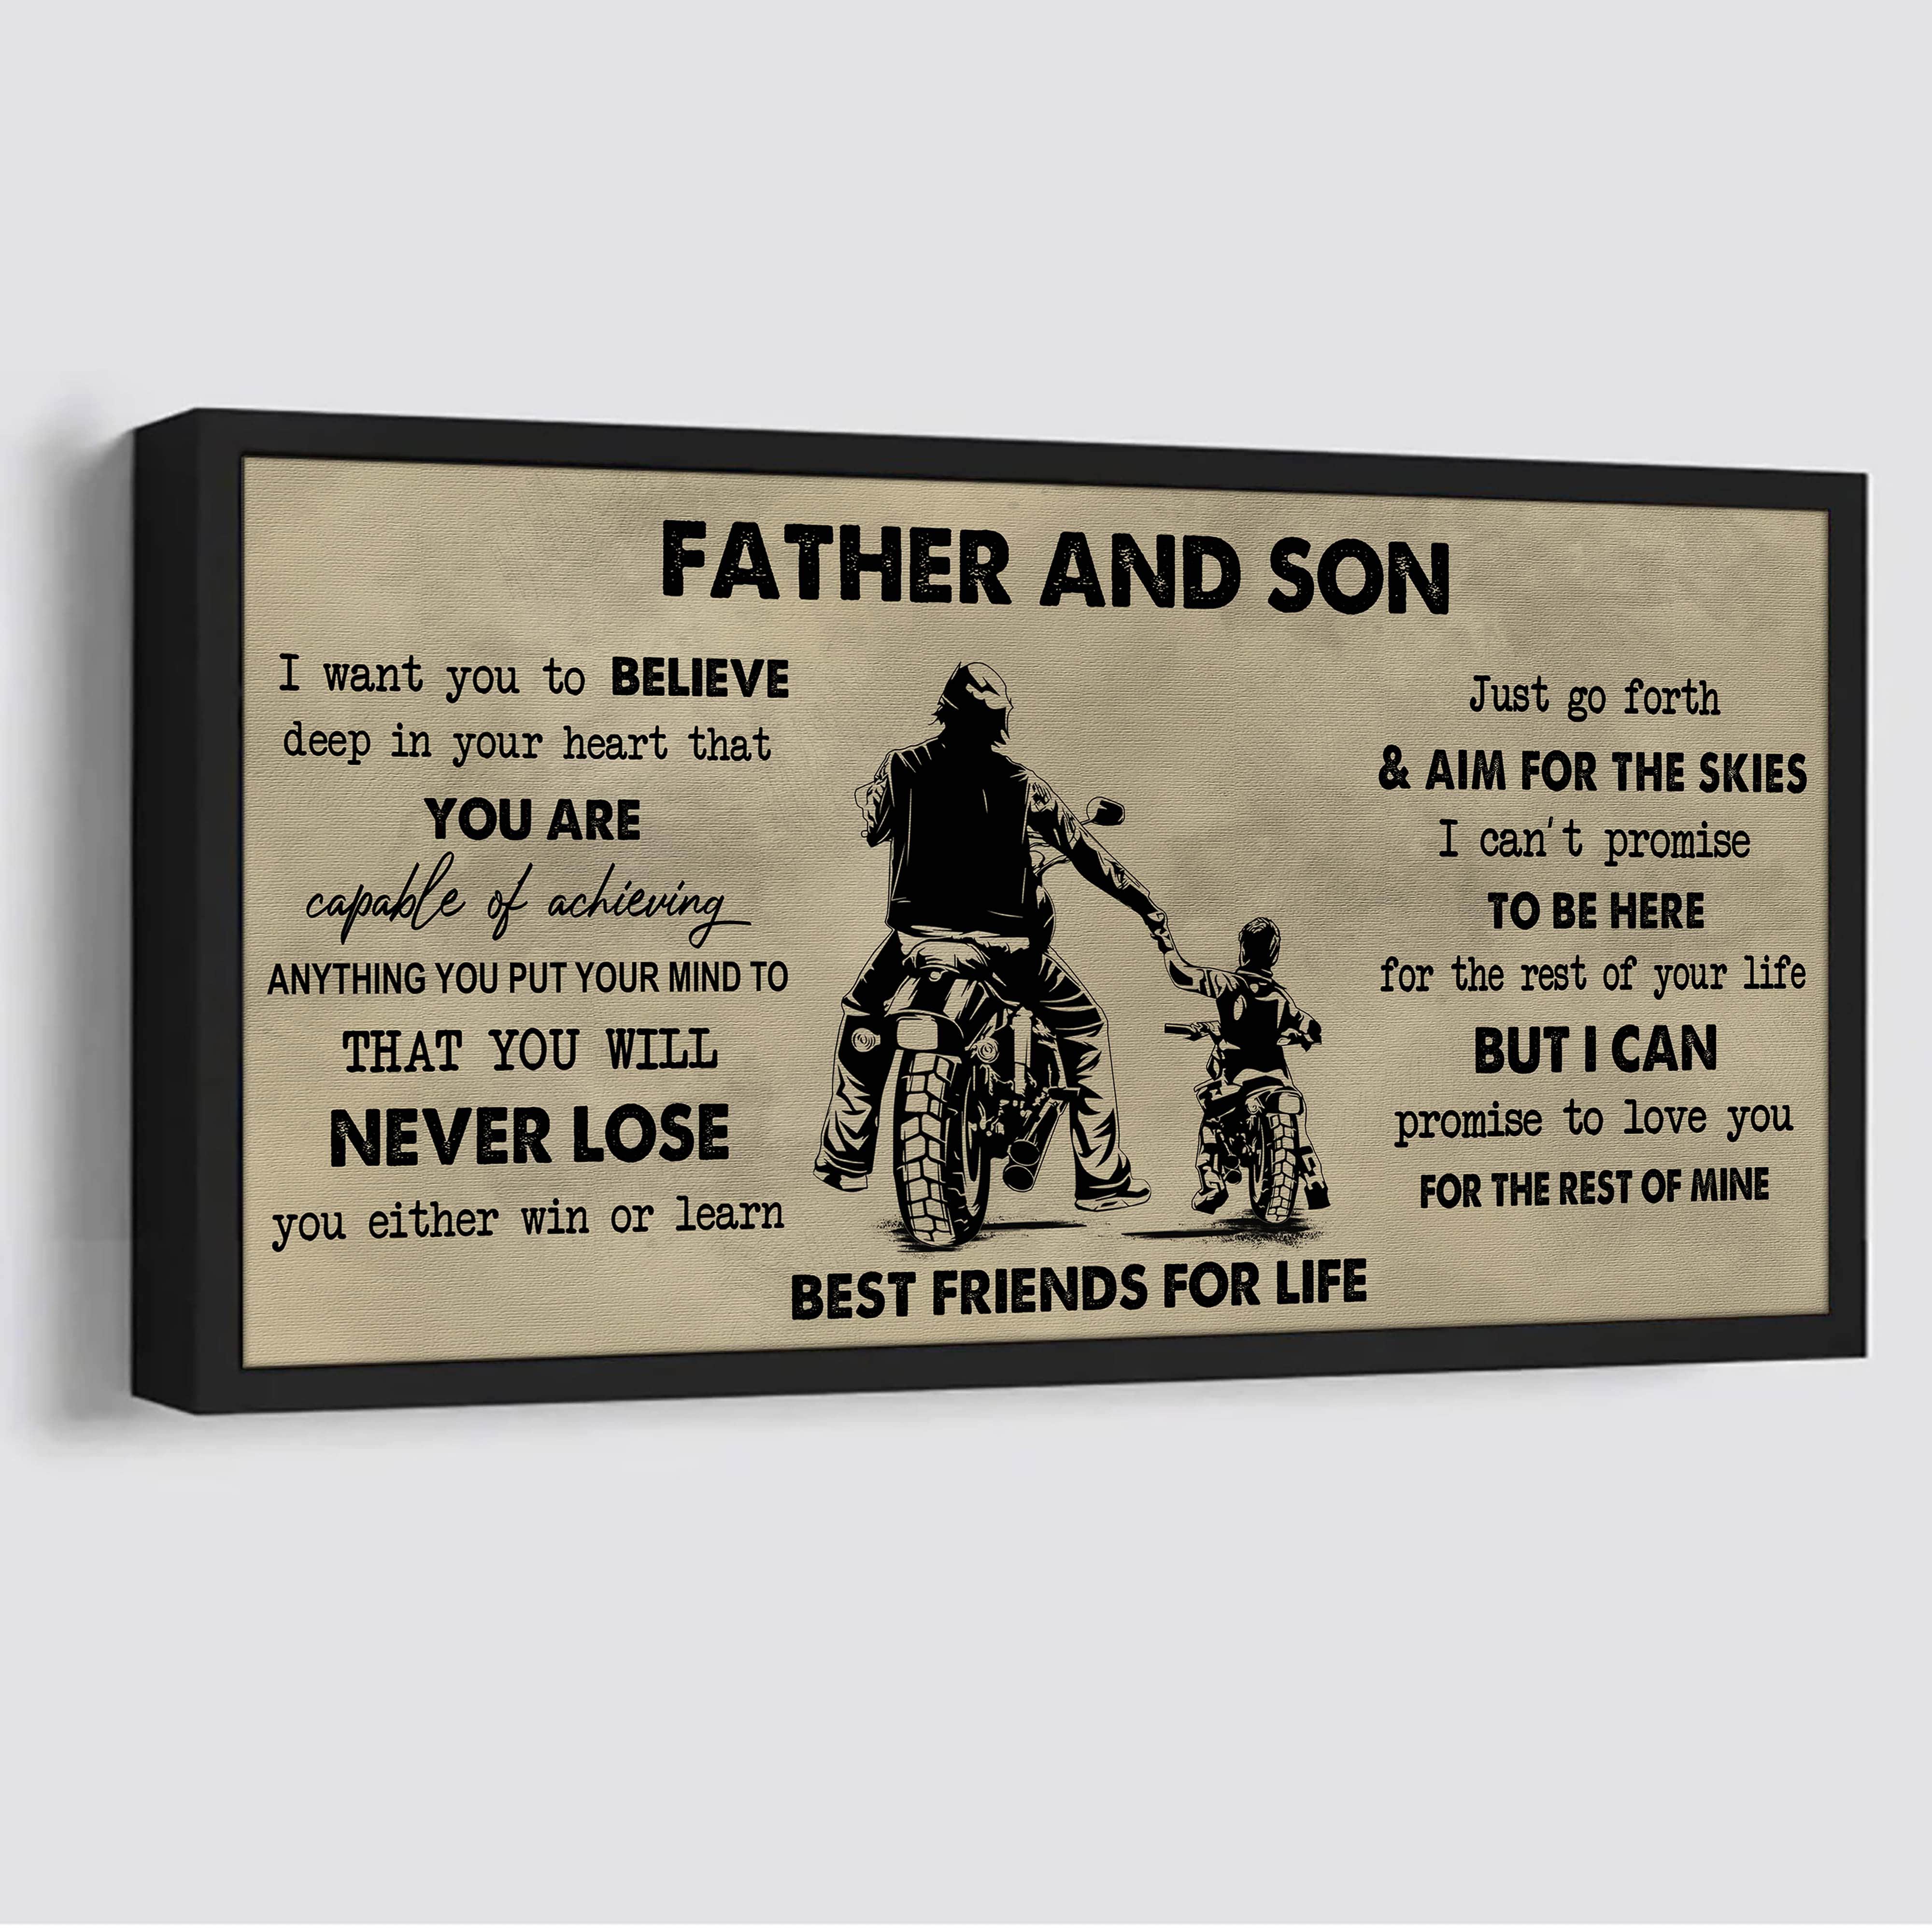 Father And Son Best Friend For Life - You Will Never Lose Poster Canvas Gift For Son From Father